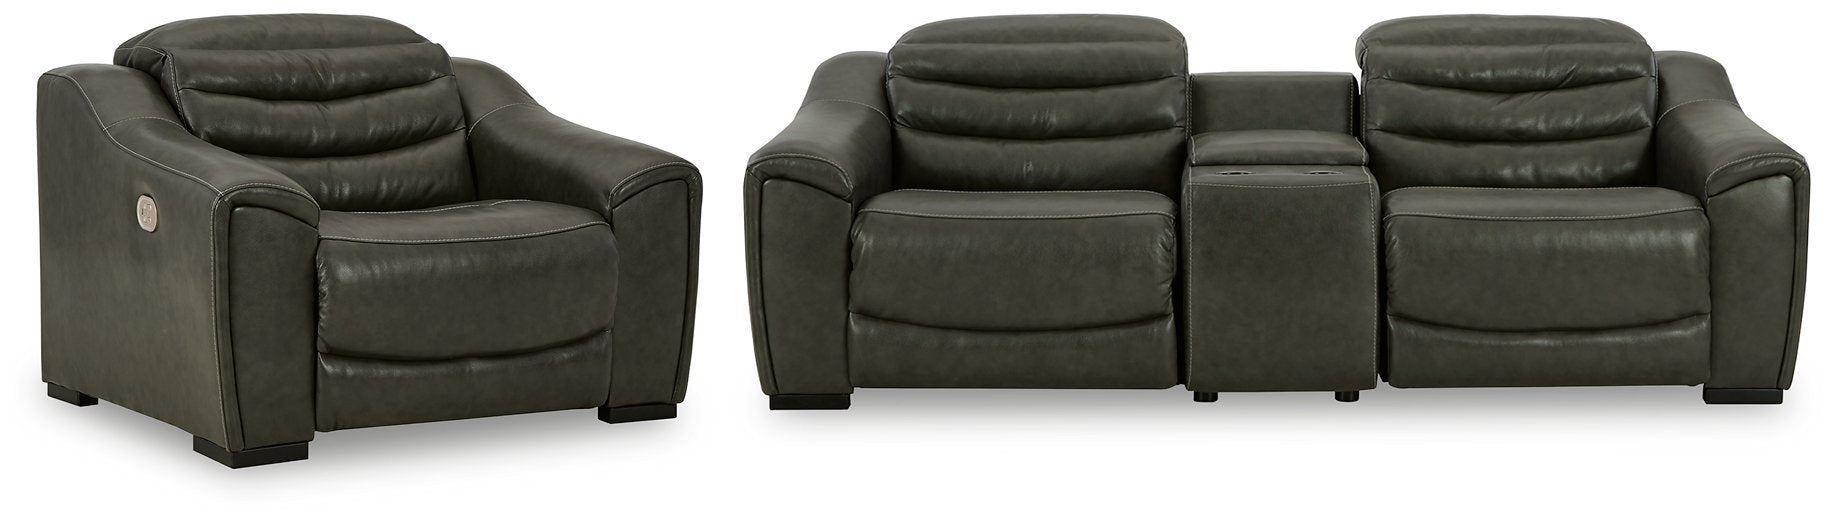 Center Line 4-Piece Upholstery Package Living Room Set Ashley Furniture